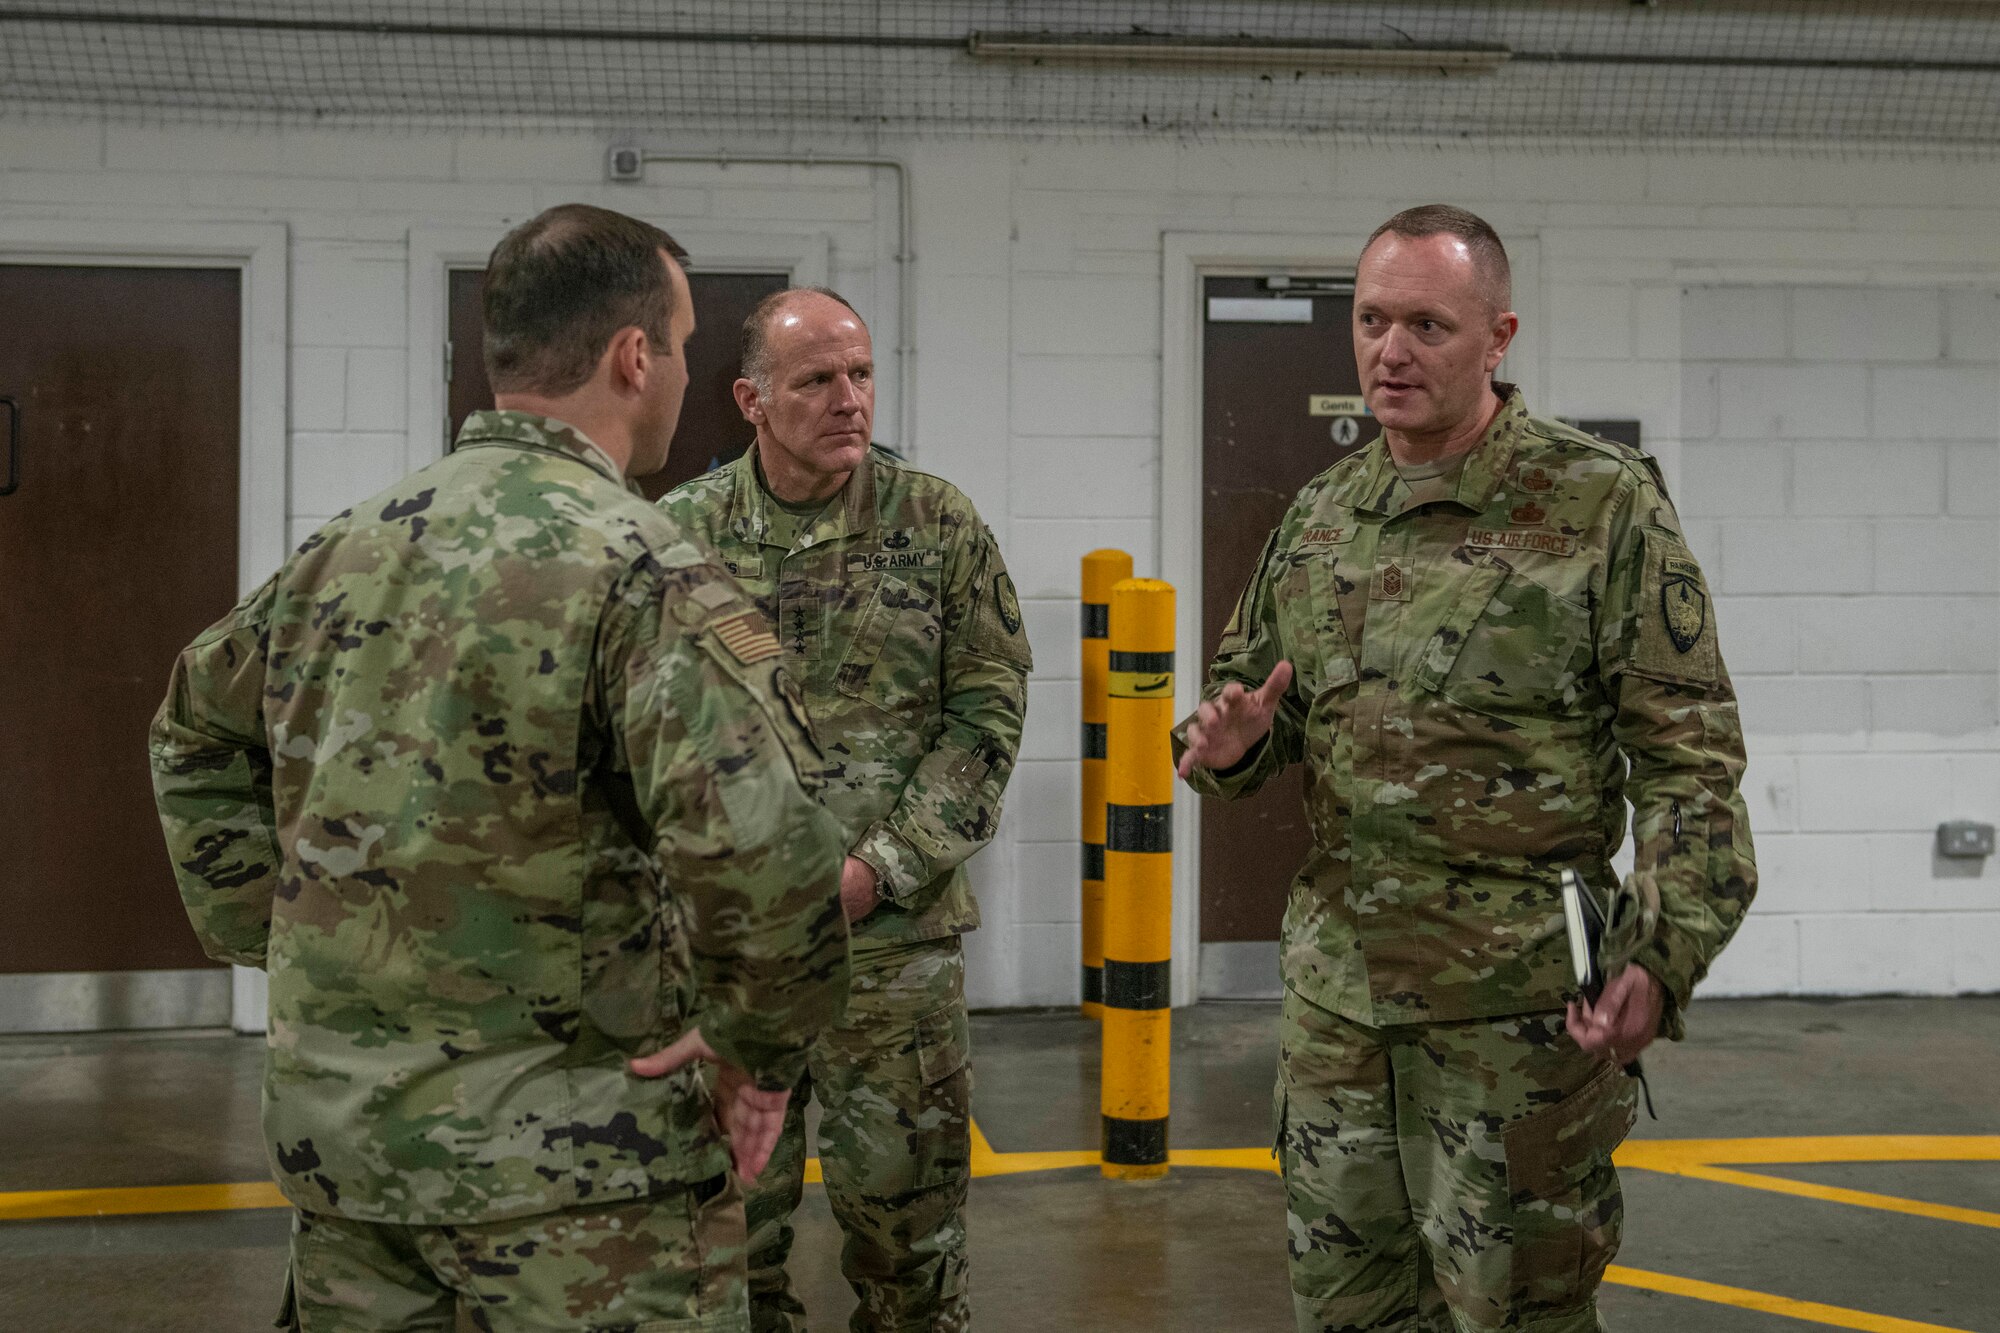 U.S. Air Force Chief Master Sgt. Jason France, U.S. Transportation Command senior enlisted leader, speaks to Maj. Thomas Reynolds, 727th Air Mobility Squadron commander, during a visit to RAF Mildenhall, England, Nov. 19, 2019. France and Gen. Stephen Lyons, USTRANSCOM commander, visited RAF Mildenhall to discuss transportation and support operations and tour 727th AMS facilities. (U.S. Air Force photo by Senior Airman Luke Milano)